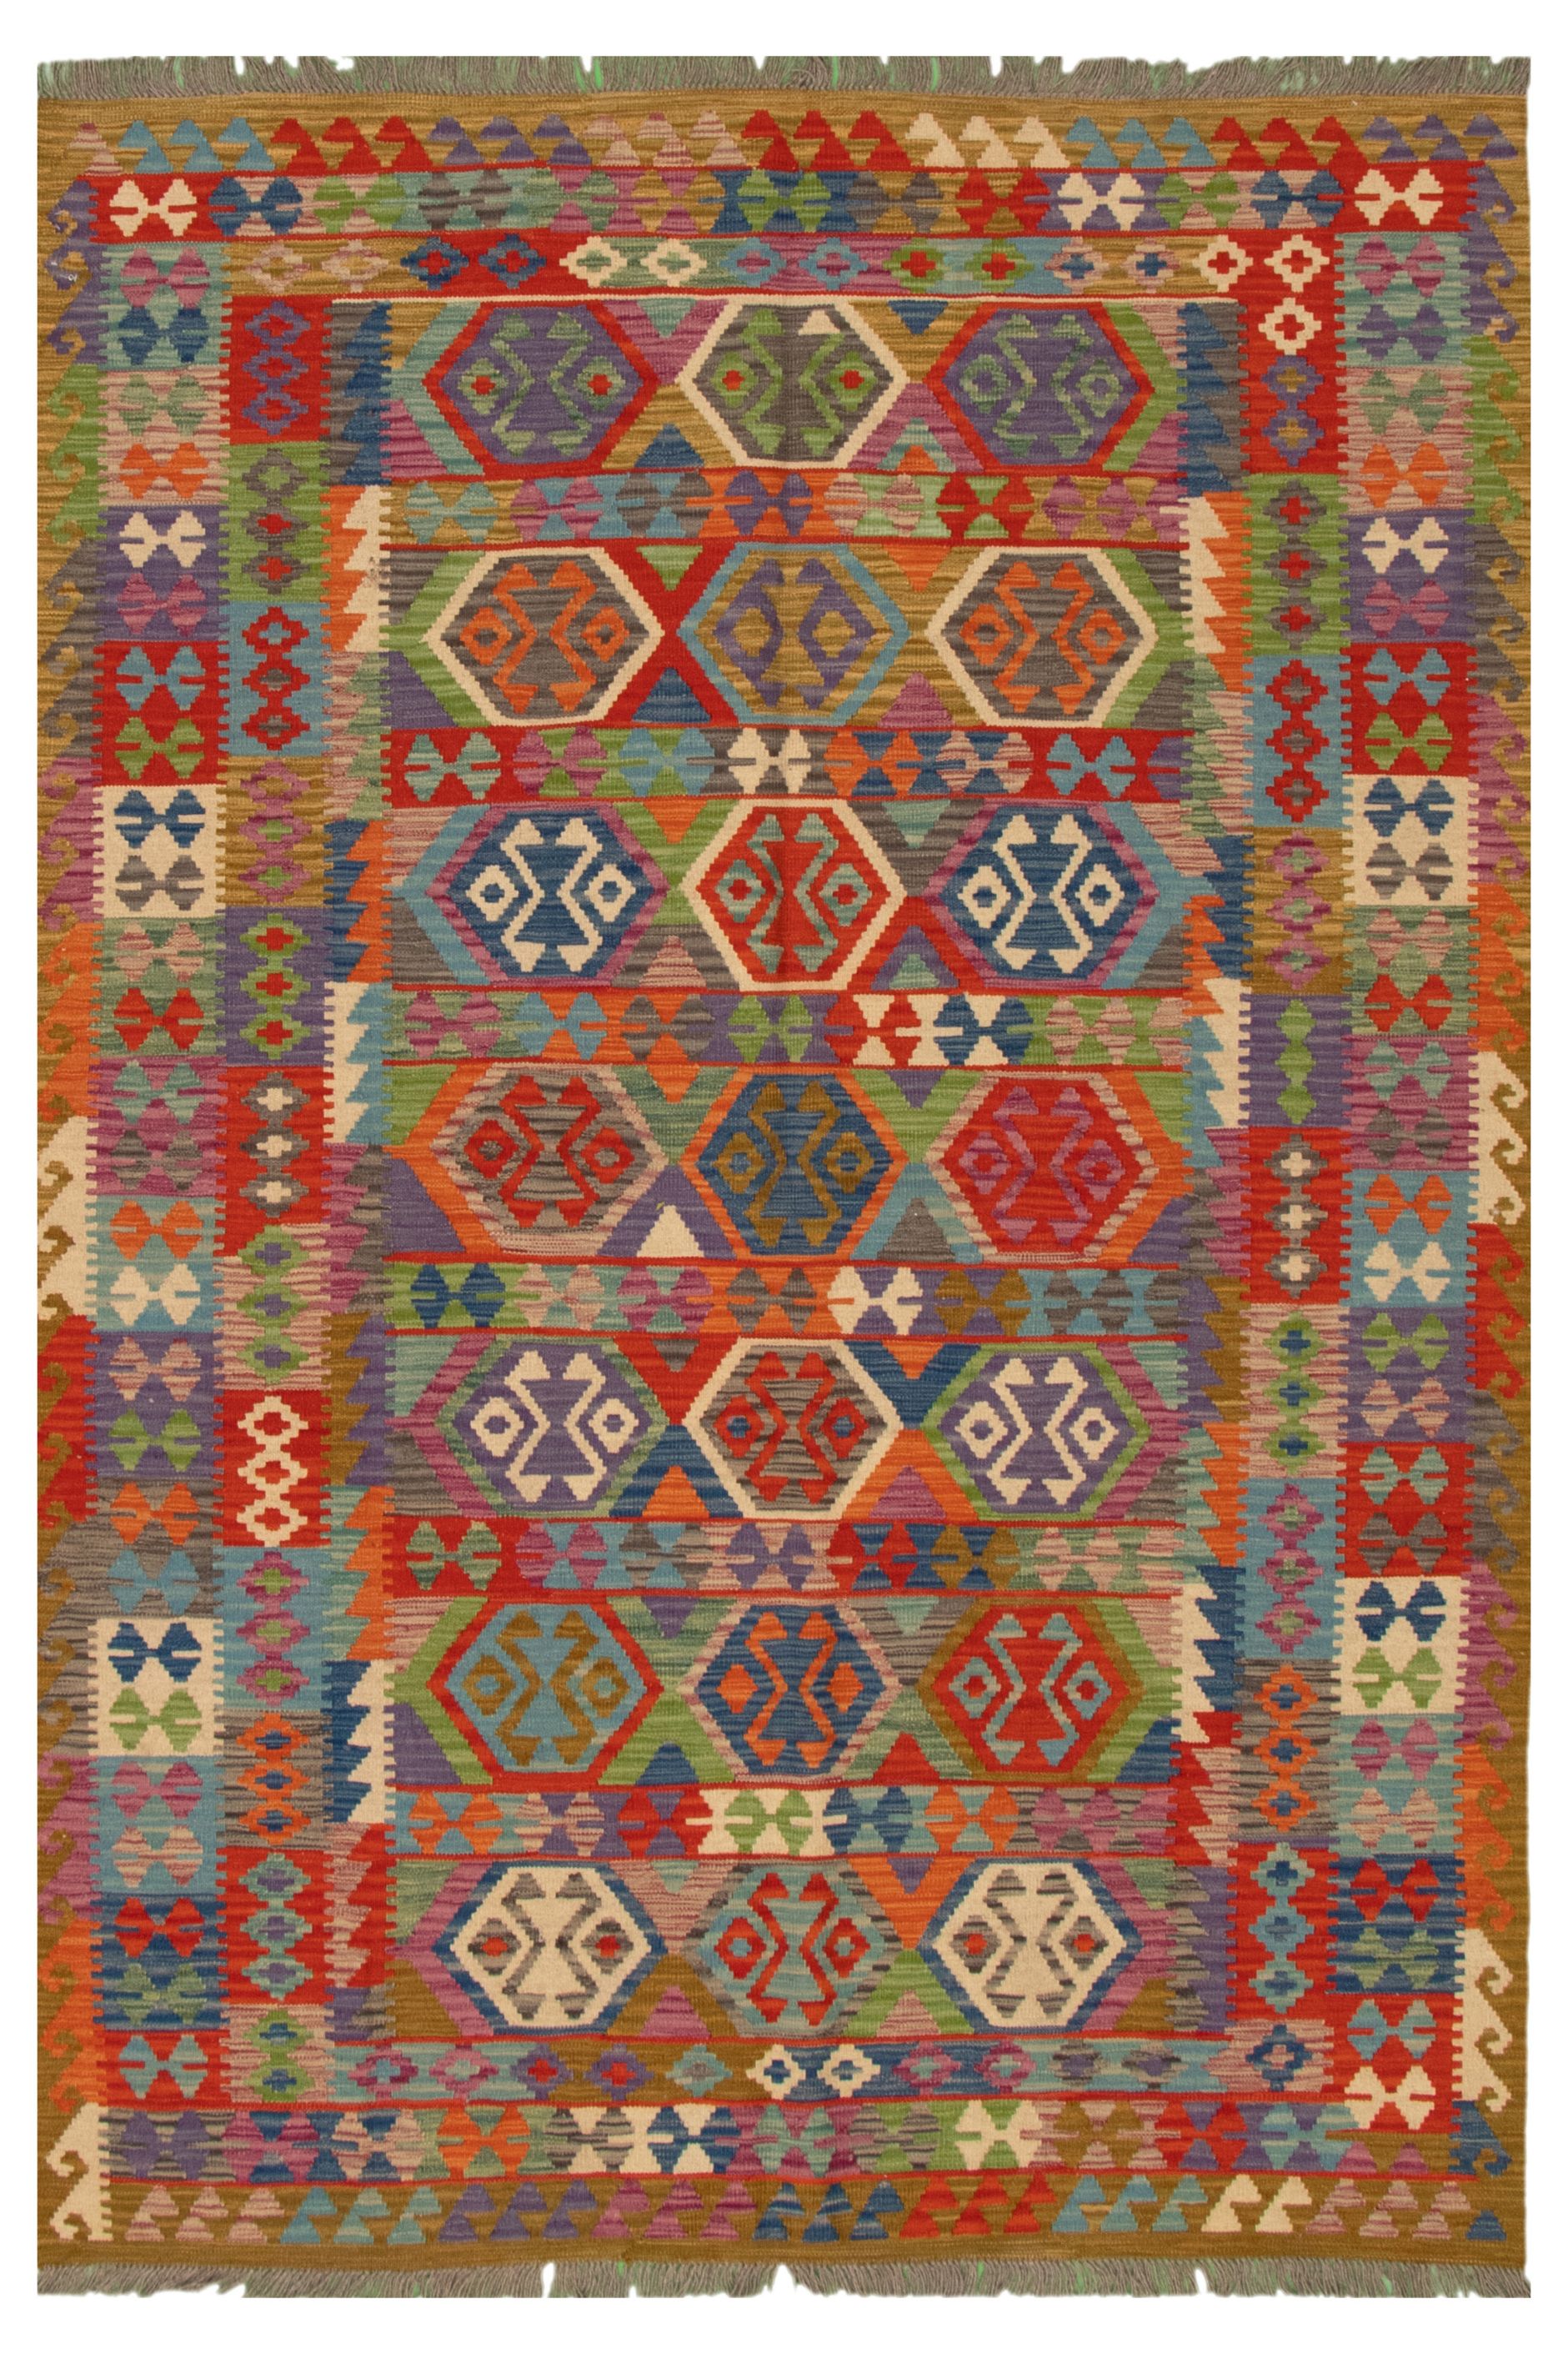 Hand woven Bold and Colorful  Multi Color Wool Kilim 6'0" x 8'5" Size: 6'0" x 8'5"  